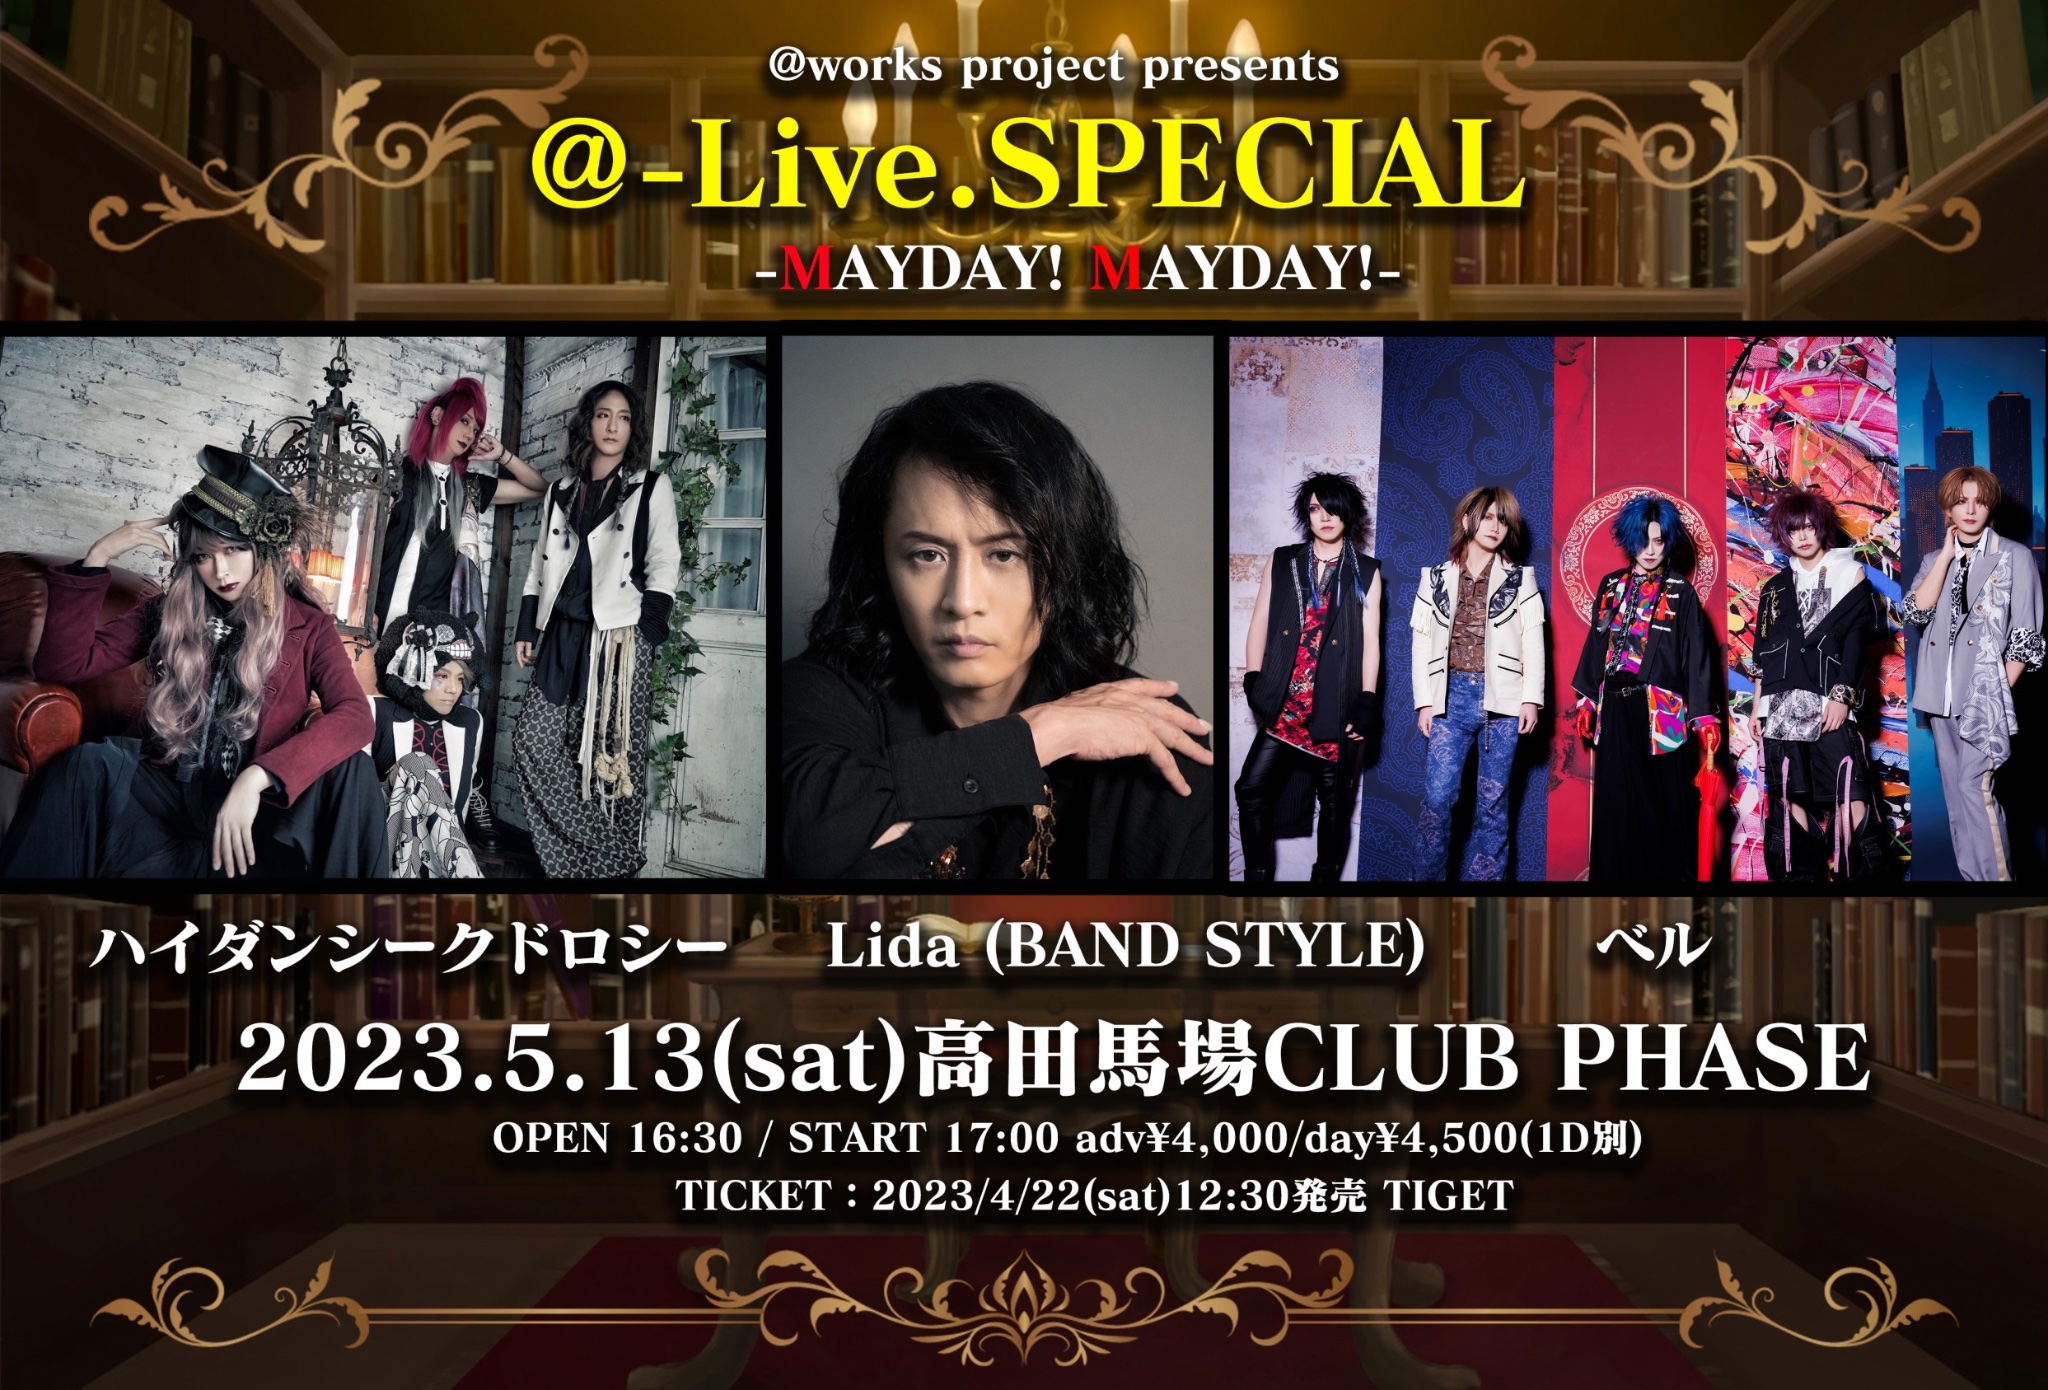 ＠-Live.SPECIAL -MAYDAY! MAYDAY!-